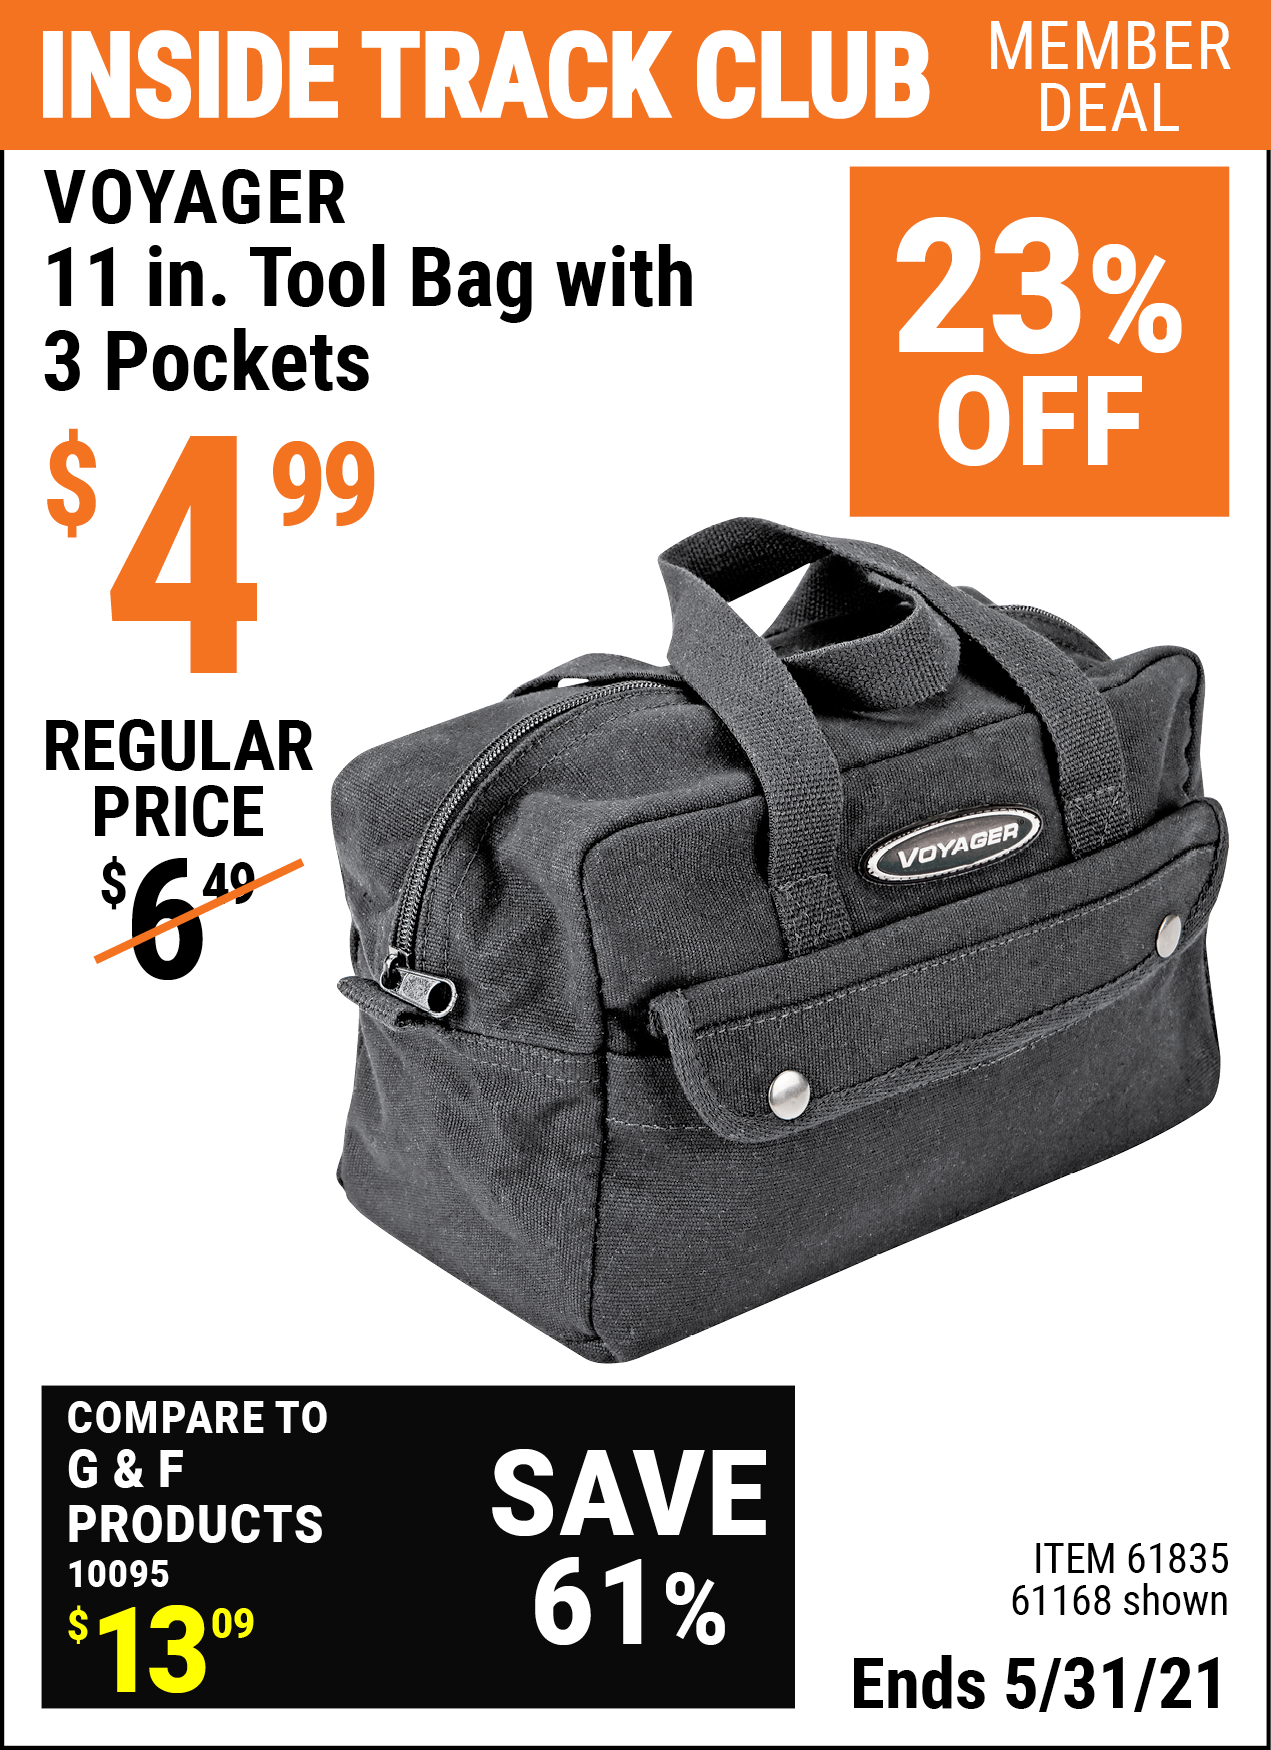 Inside Track Club members can buy the VOYAGER 11 in. Tool Bag with 3 Pockets (Item 61168/61835) for $4.99, valid through 5/31/2021.